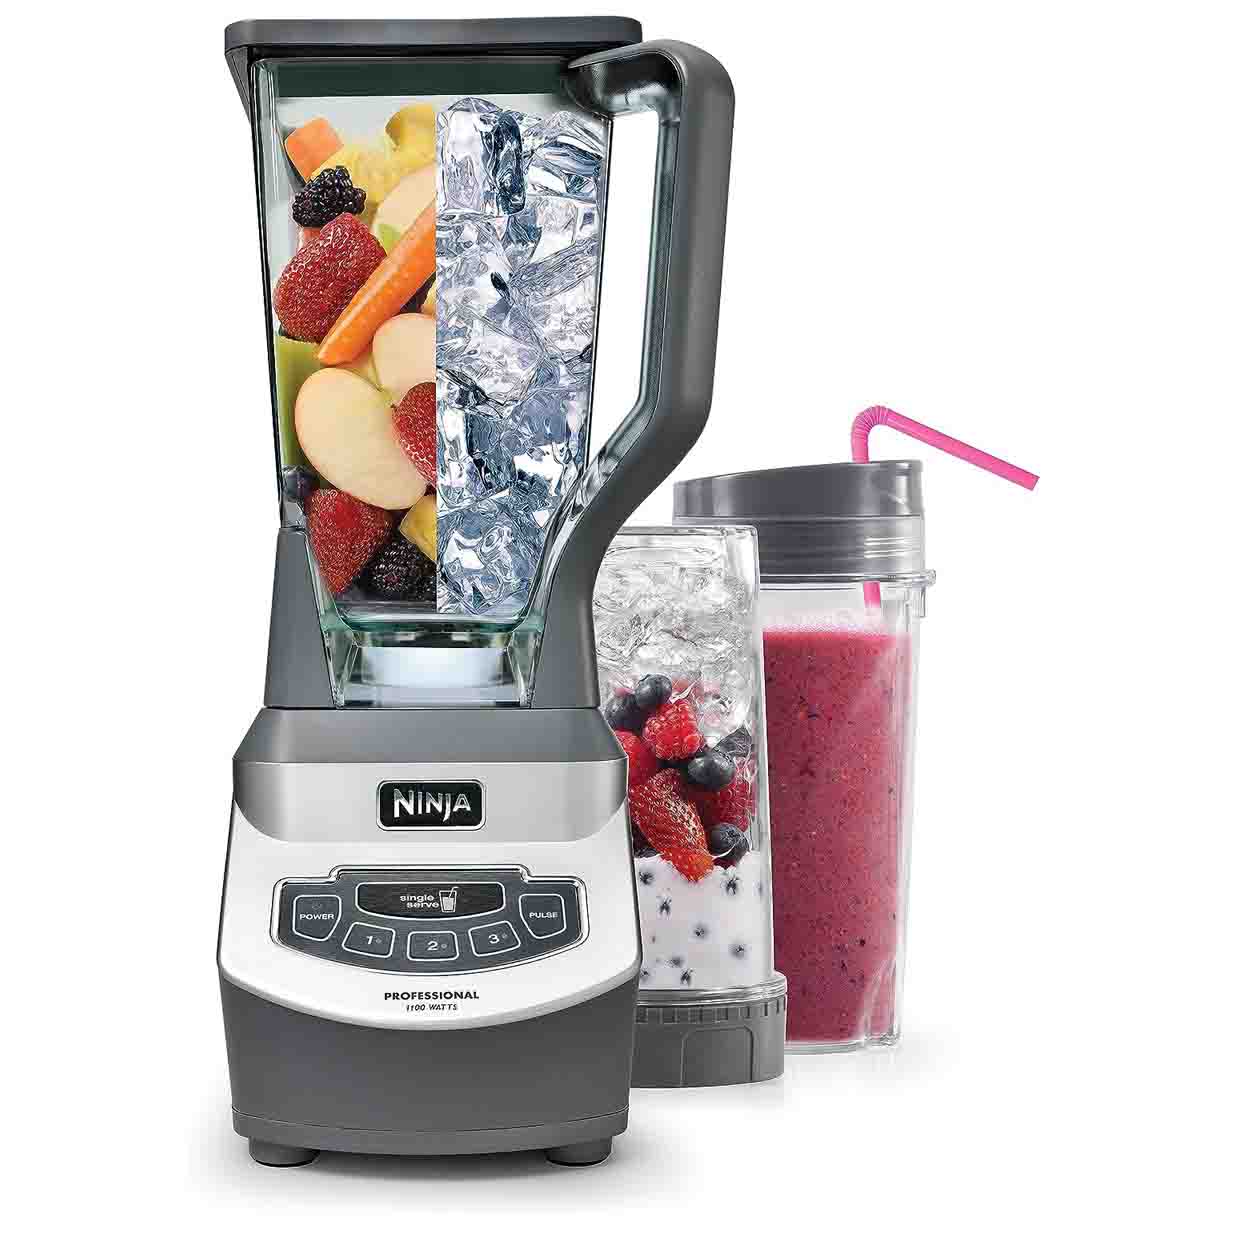 Ninja BL660 Professional Compact Smoothie & Food Processing Blender with fruit and ice inside